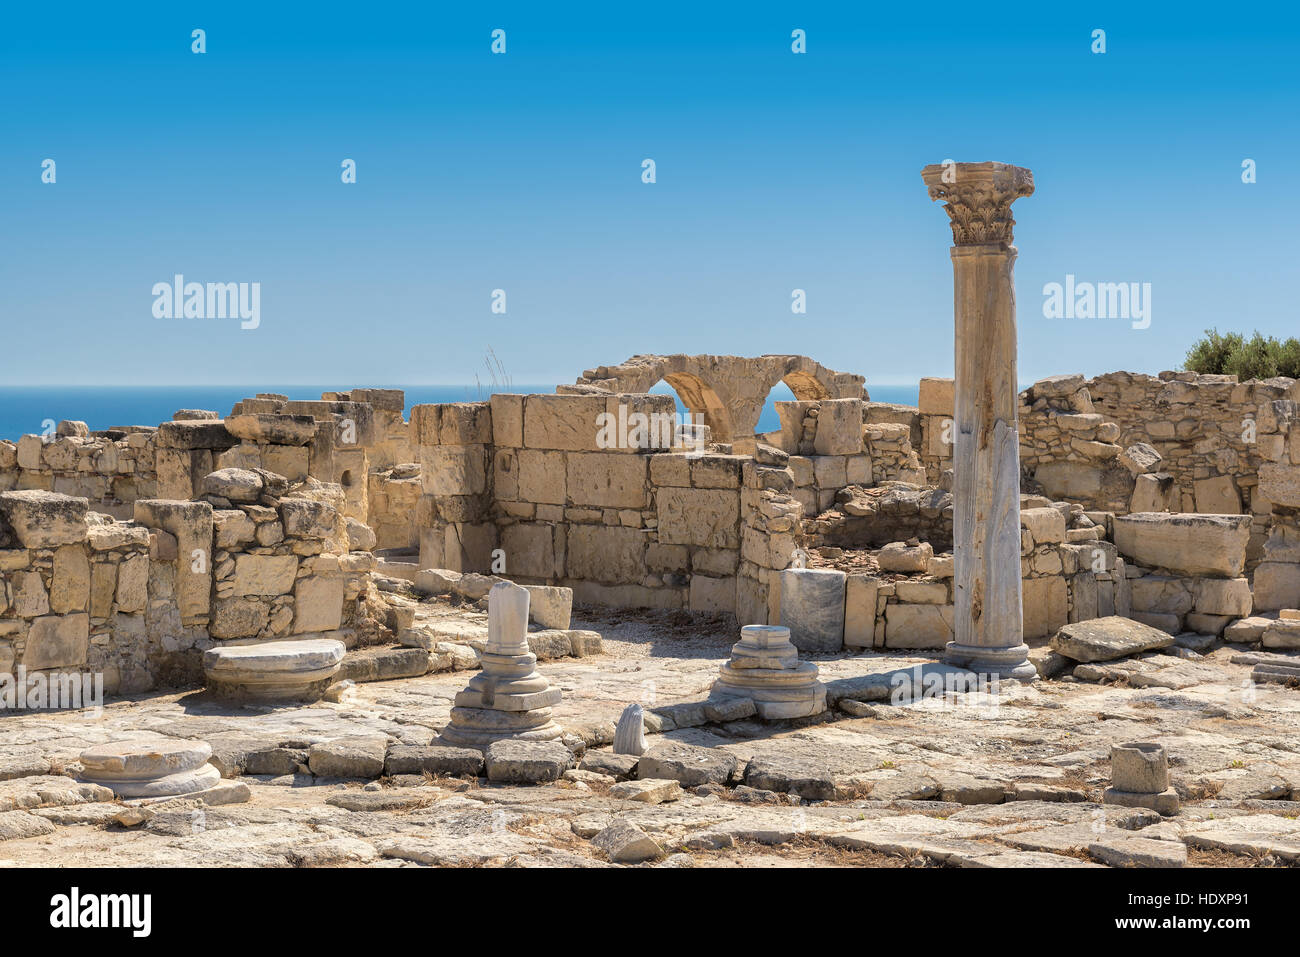 Limassol District. Cyprus. Ruins of ancient Kourion. Stock Photo